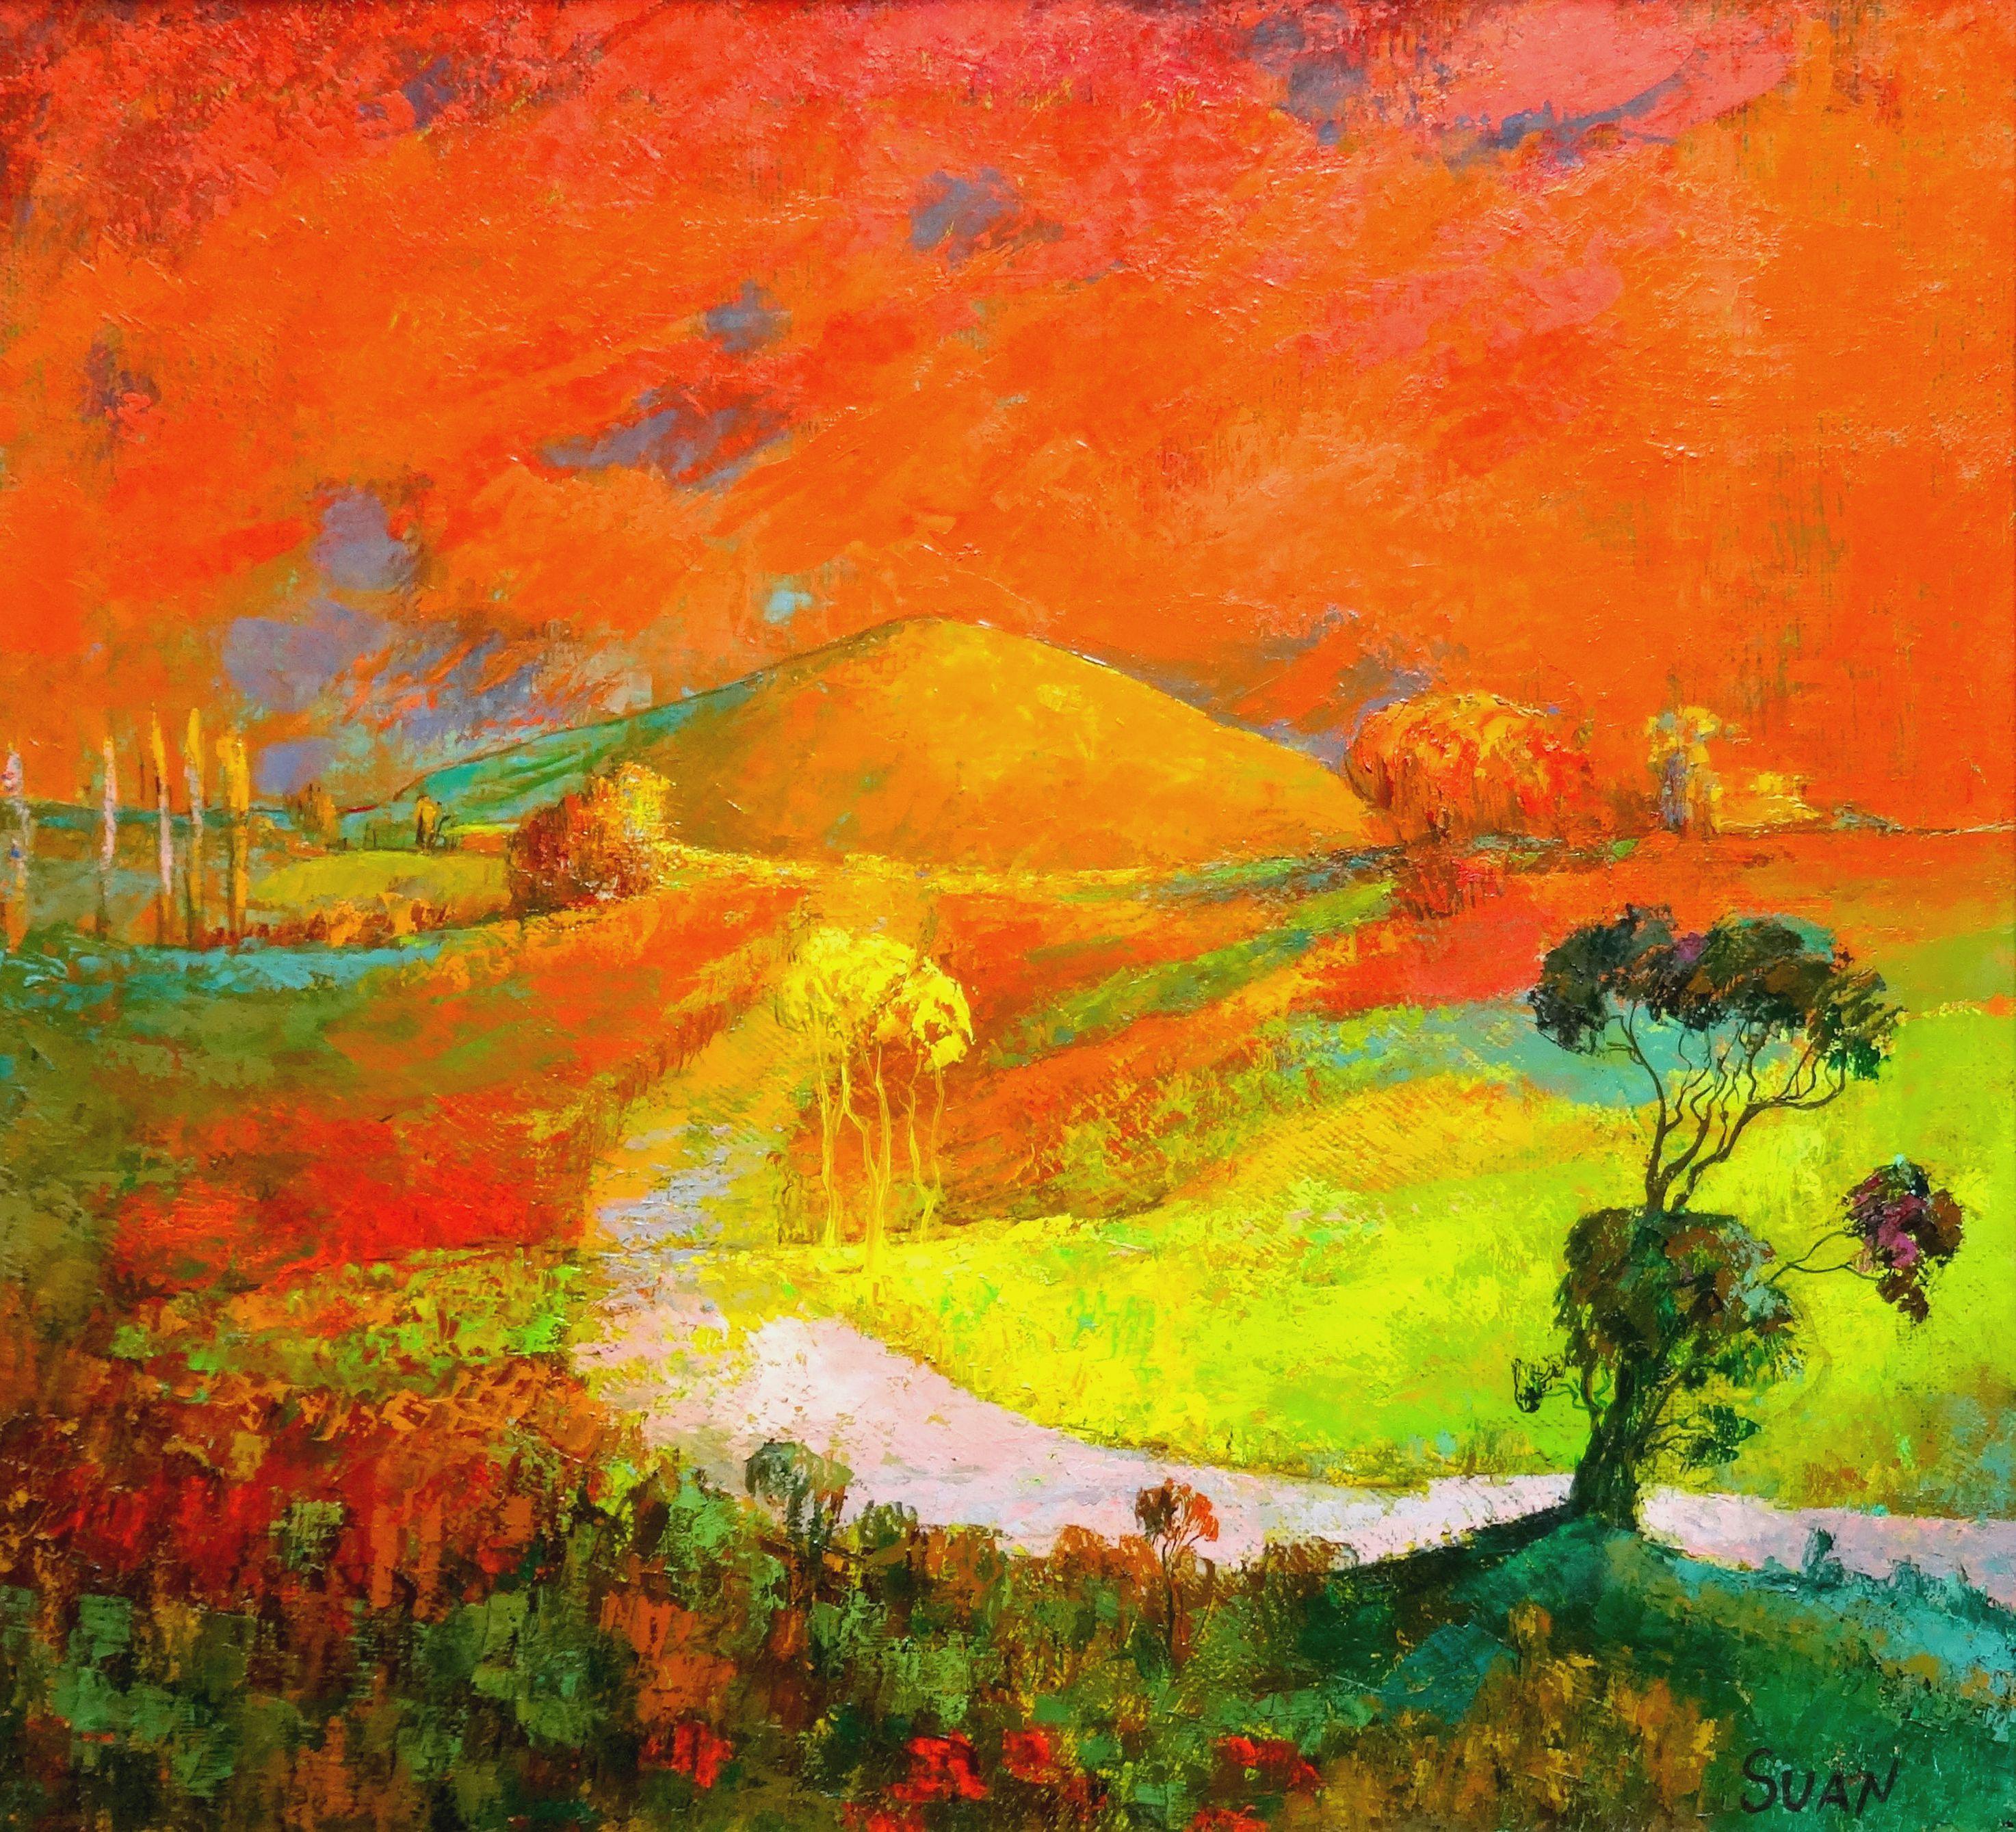 The road to nowhere. 2007, oil on canvas, 60x55 cm